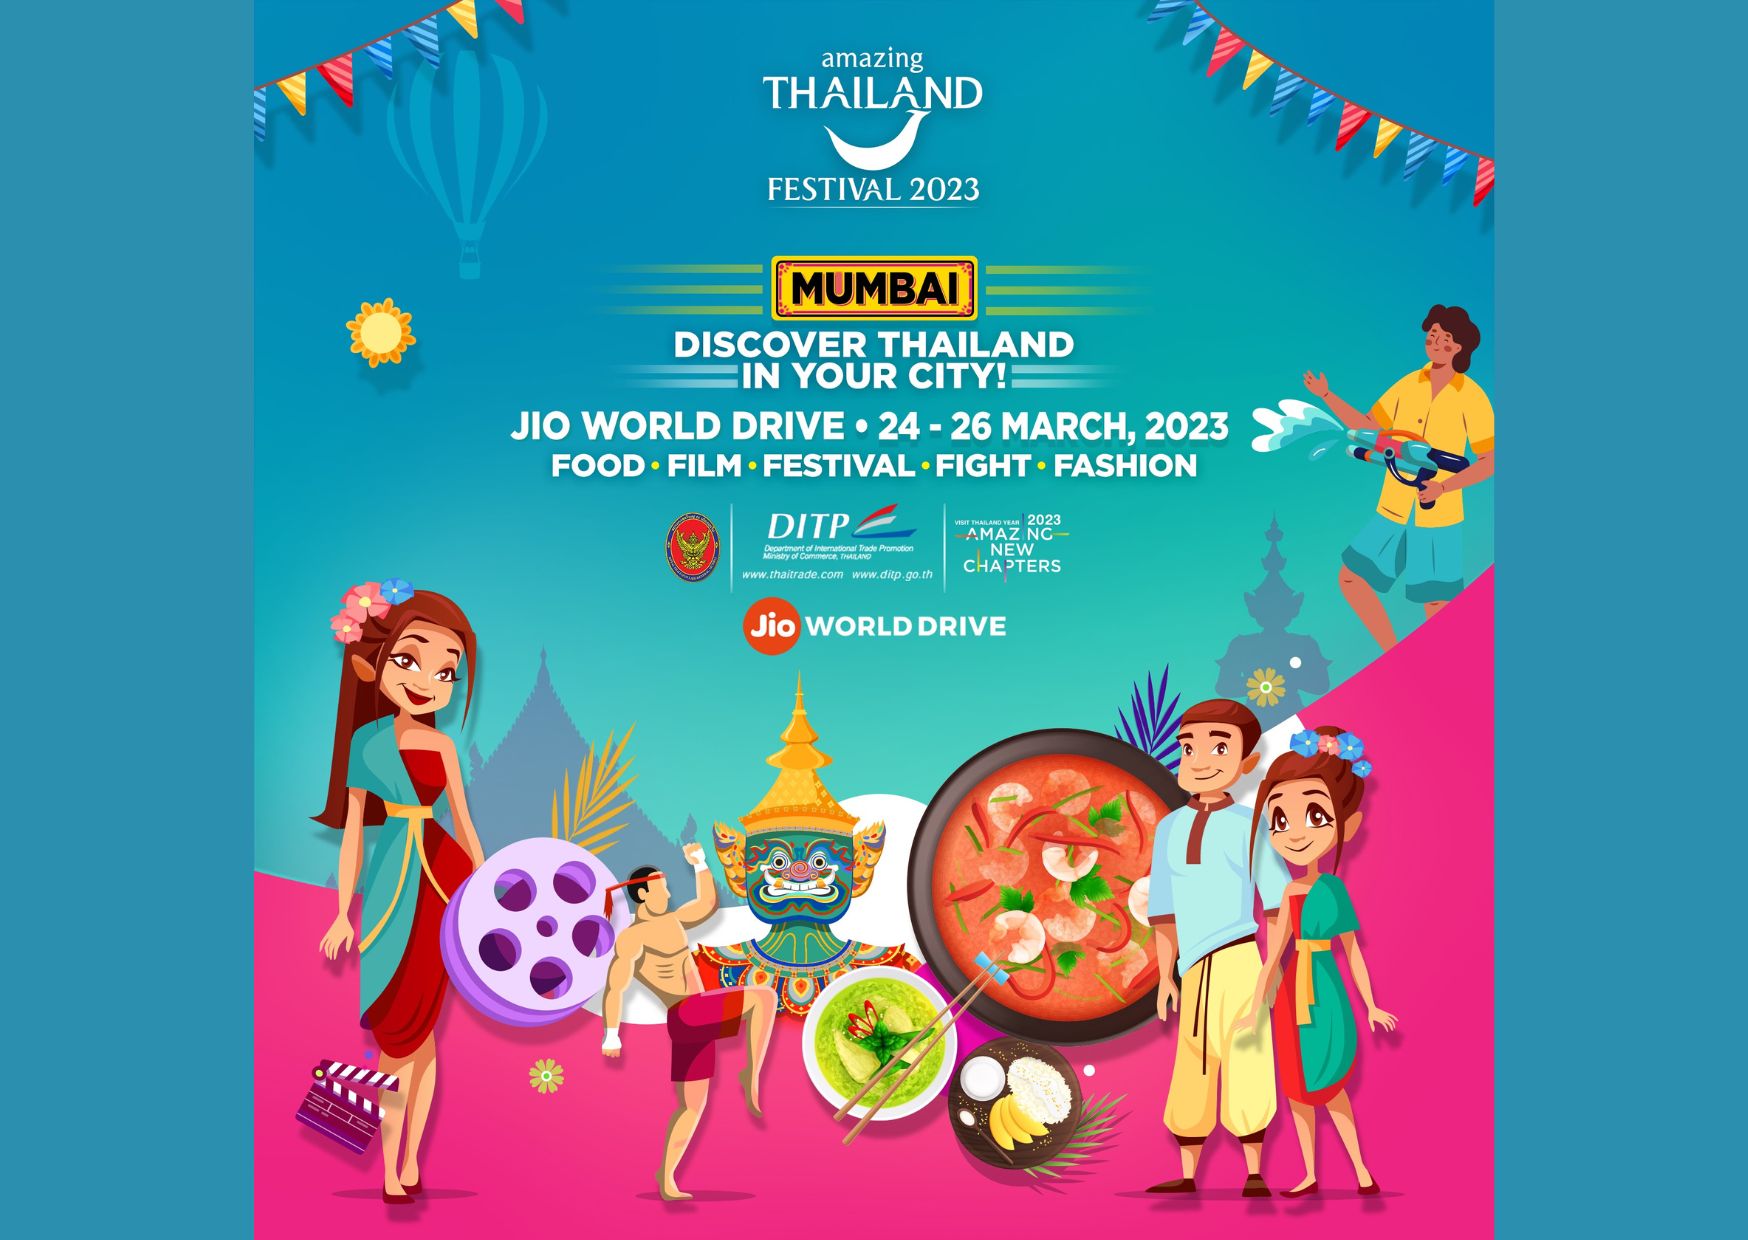 Tourism Authority of Thailand gears up for the 'Amazing Thailand Festival  2023' in Mumbai - Travel Trade Journal